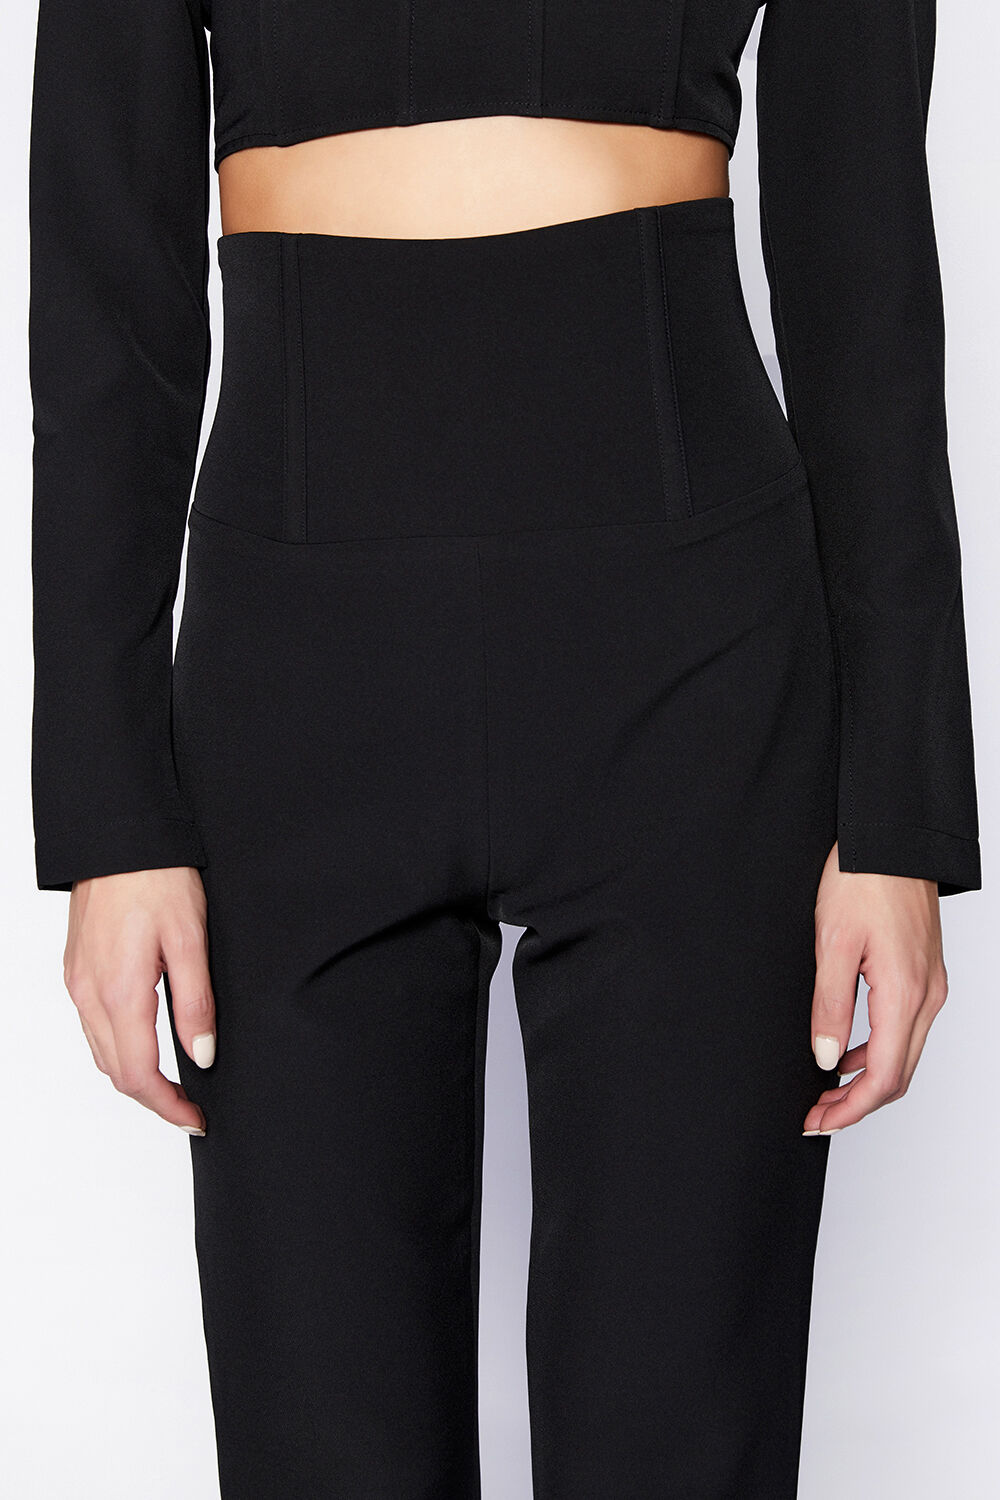 KENDALL CORSET PANT in colour CAVIAR